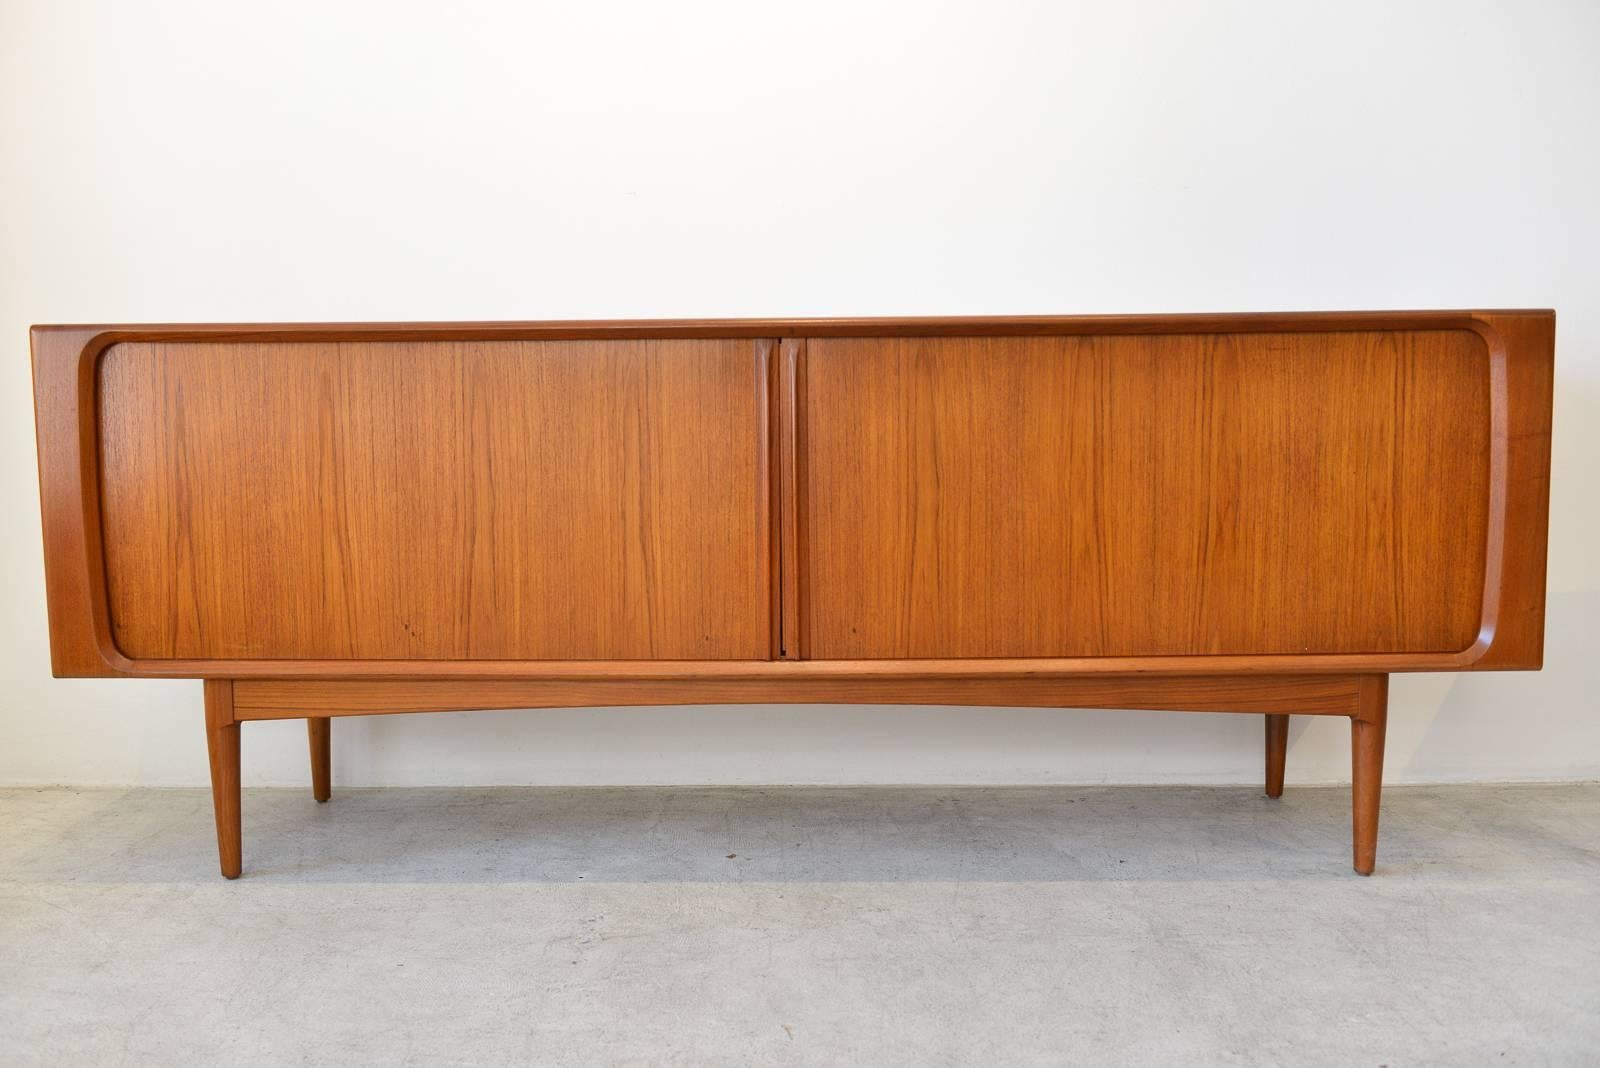 Bernhard Pedersen & Sons tambour door credenza, circa 1965. Beautifully restored in showroom perfect condition, this piece is also finished on the back.

Doors slide smoothly and includes inner adjustable shelving on both sides. Three drawers in